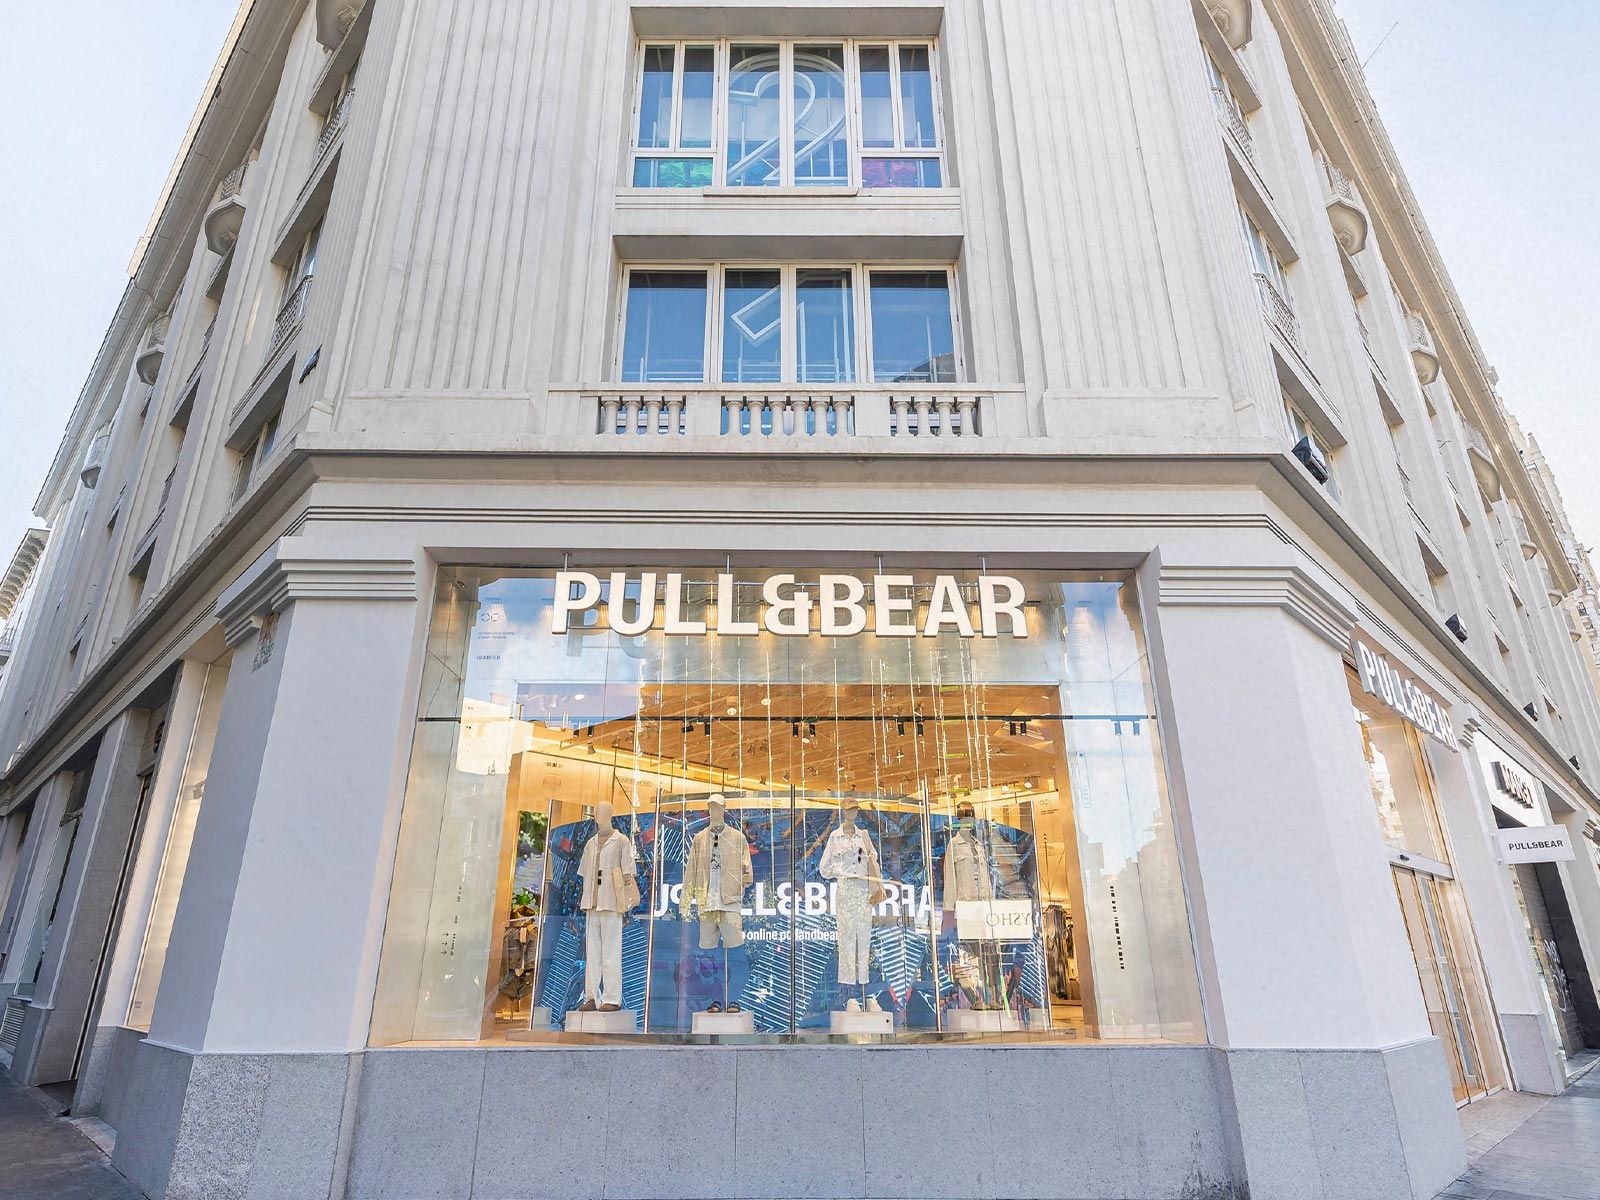 Pull&Bear conquers Madrid’s Gran Vía with its new flagship store